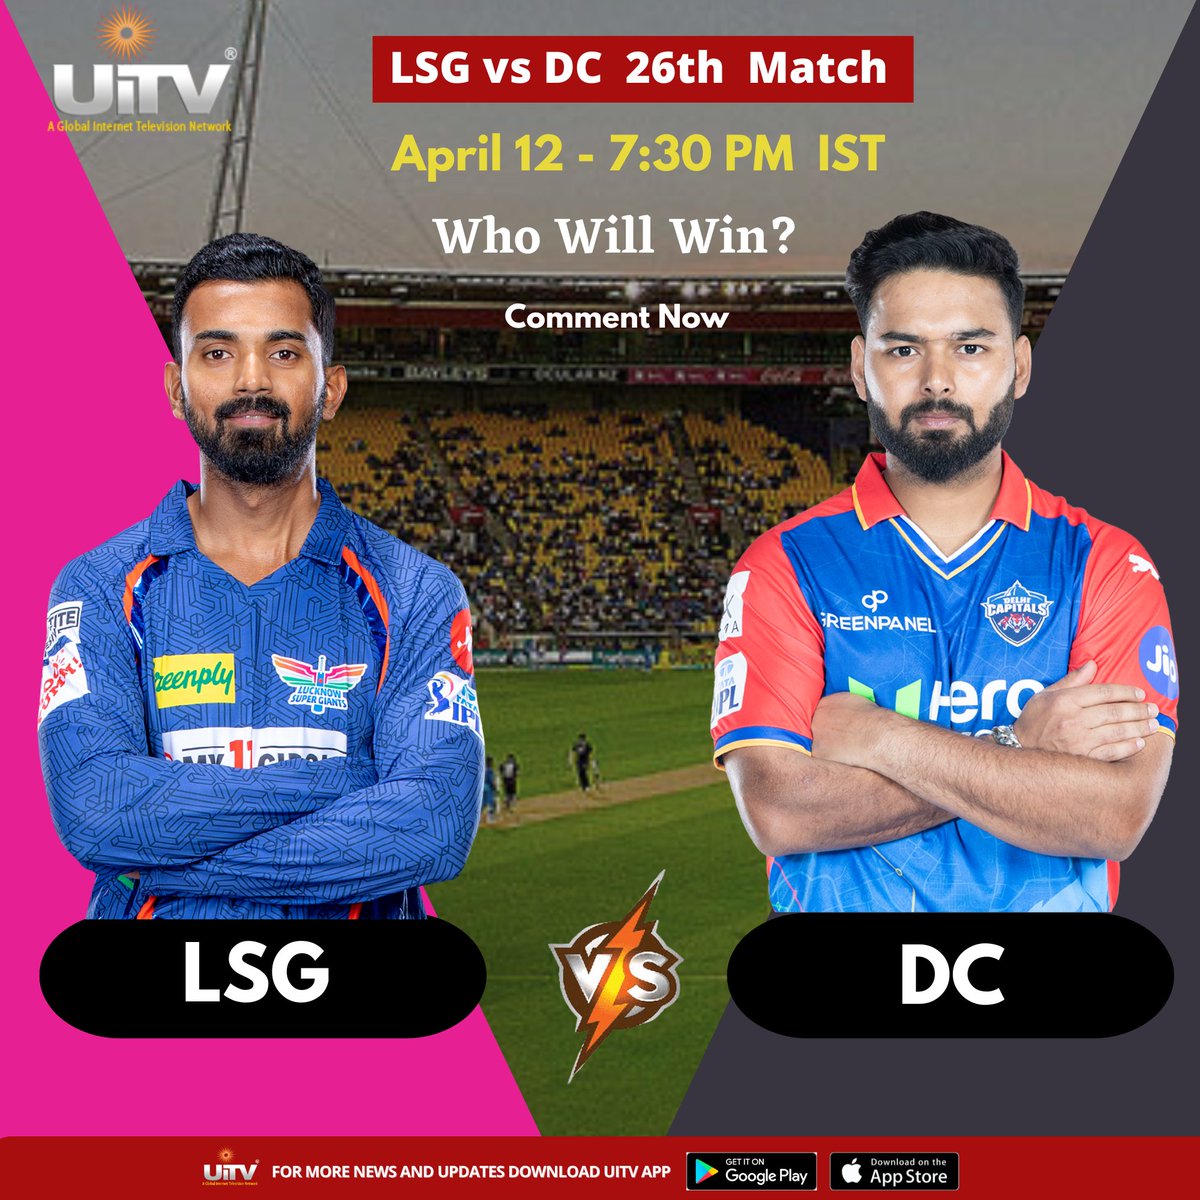 🎉 Let's paint the town blue and orange as we cheer for our favorite teams and celebrate the spirit of cricket! 🙌 Don't miss out on the action-packed entertainment, tonight at the IPL arena! 📺🏟️ #LSGvsDC #IPL2024 #CricketFever #GameOn 🏏💥